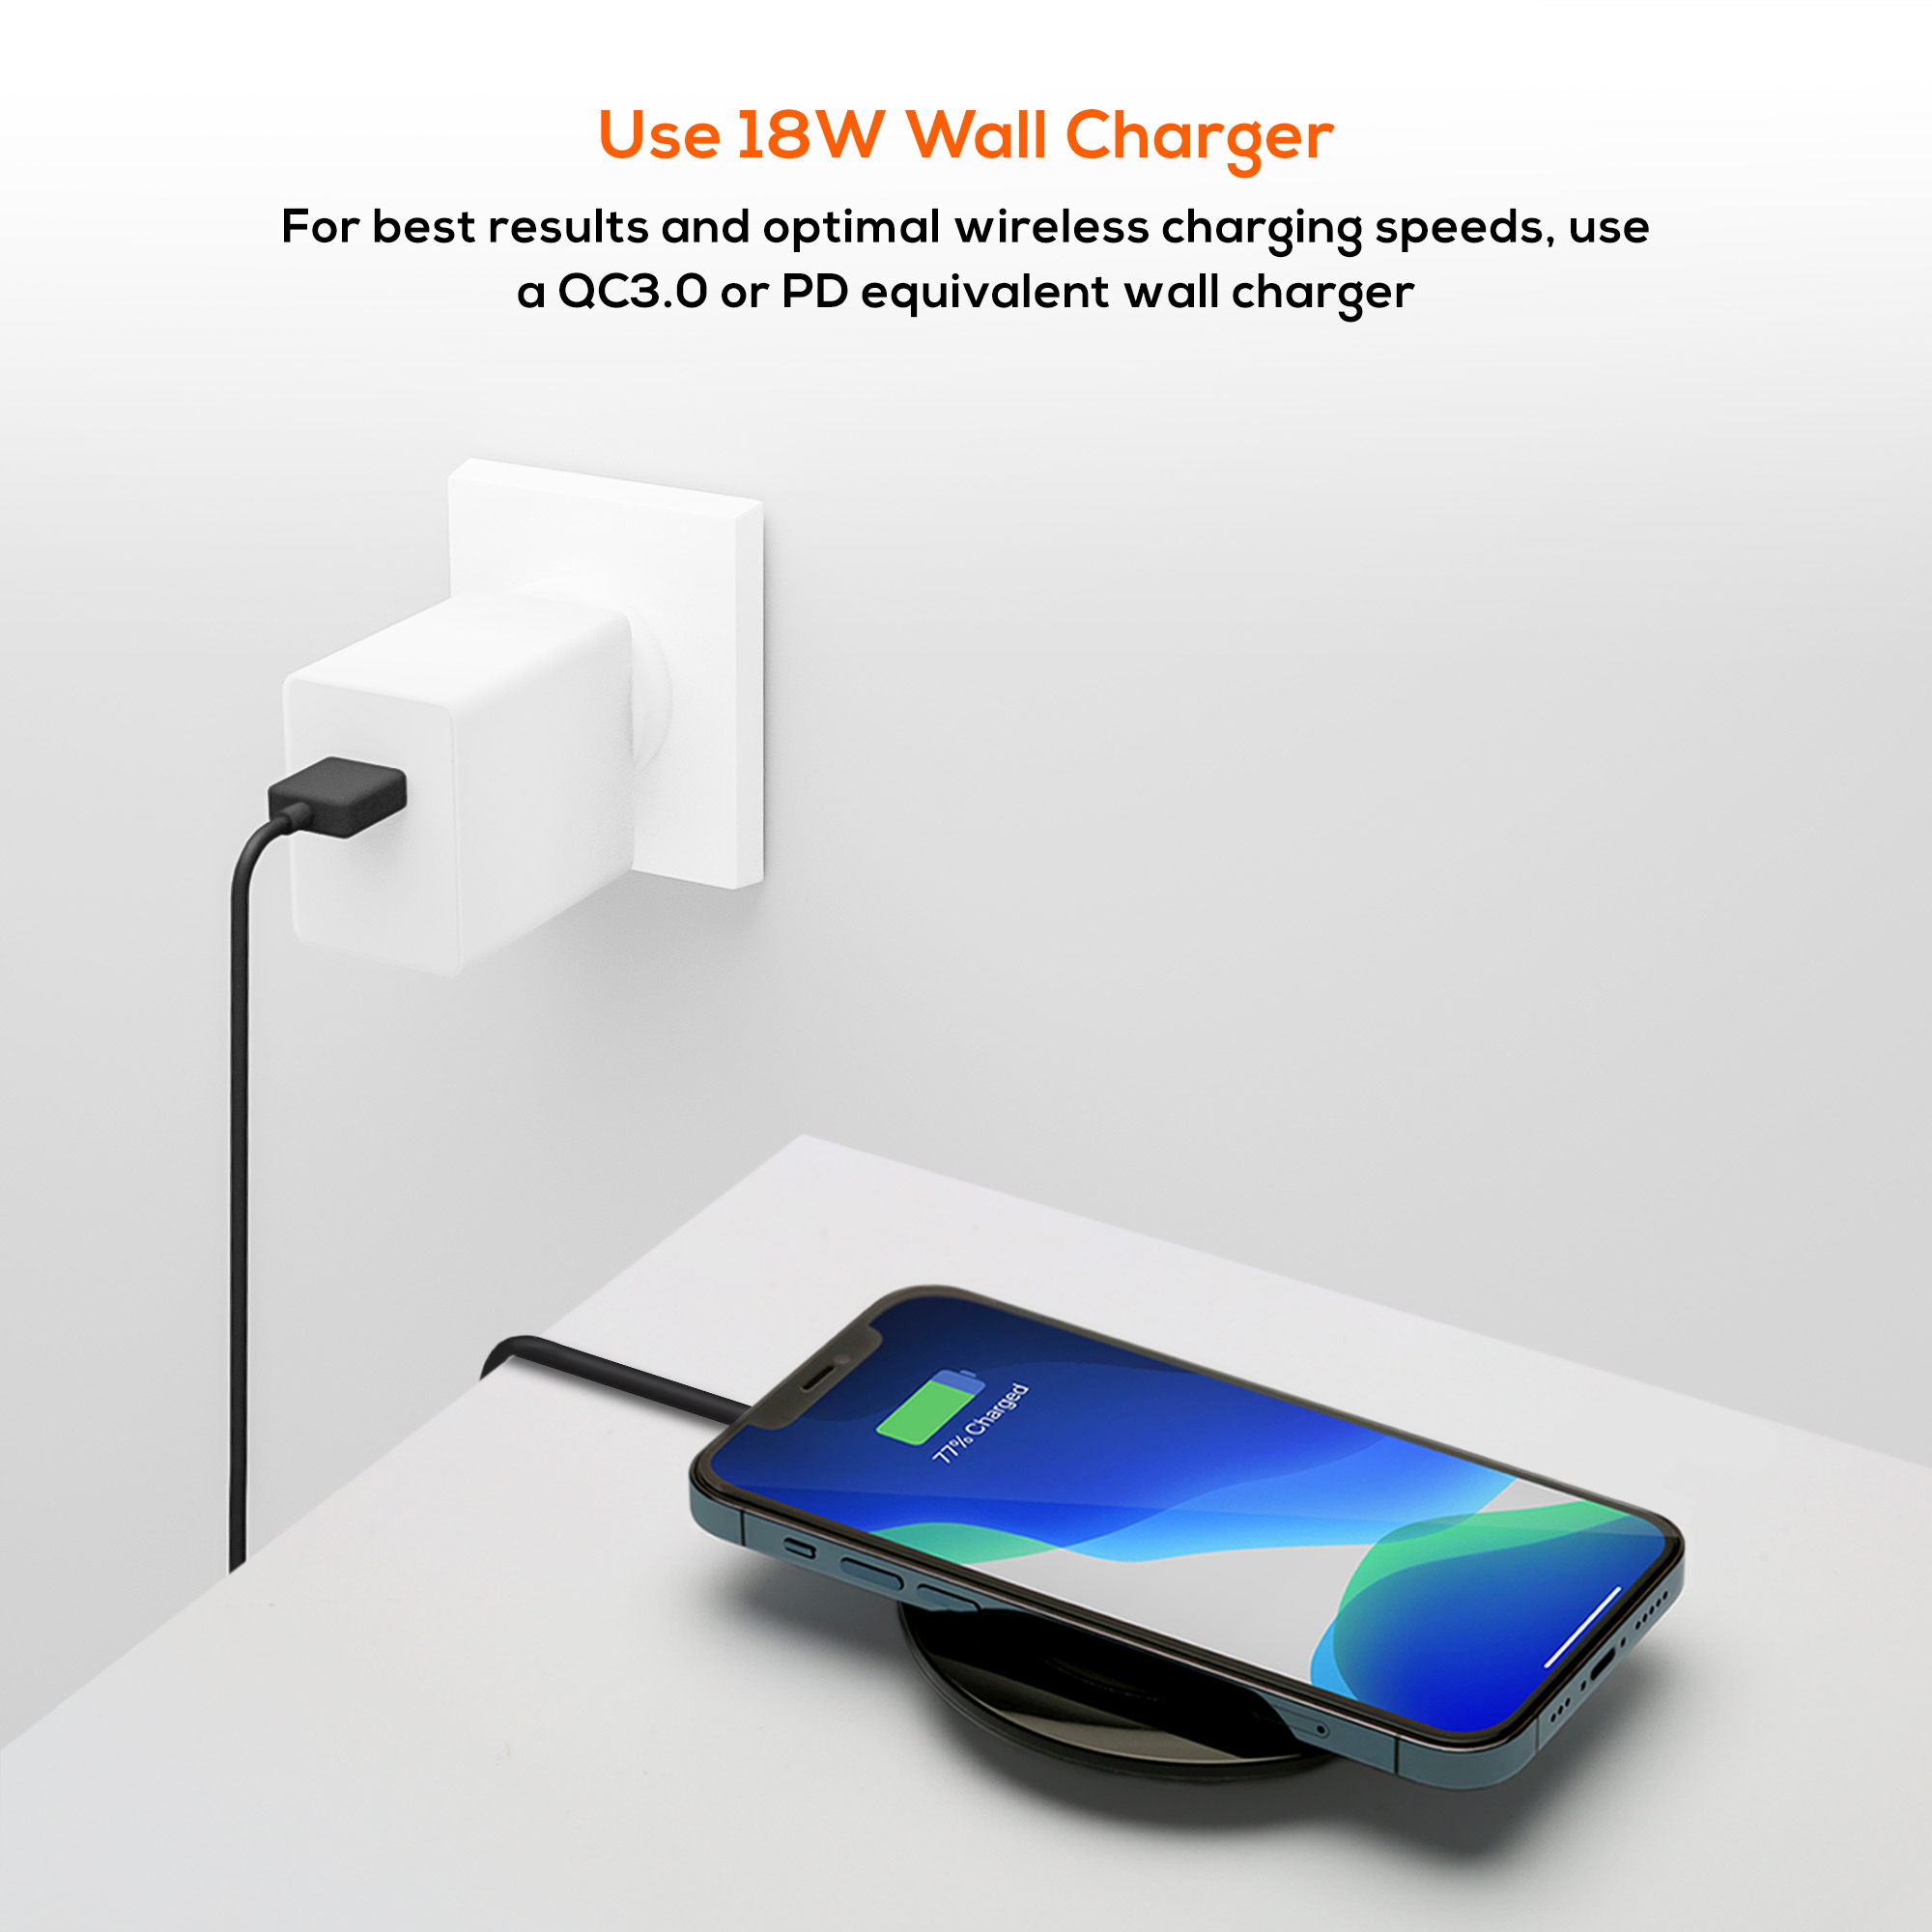 A large marketing image providing additional information about the product mbeat Gorilla Power 10W Qi Certified Wireless Charging Pad - Additional alt info not provided